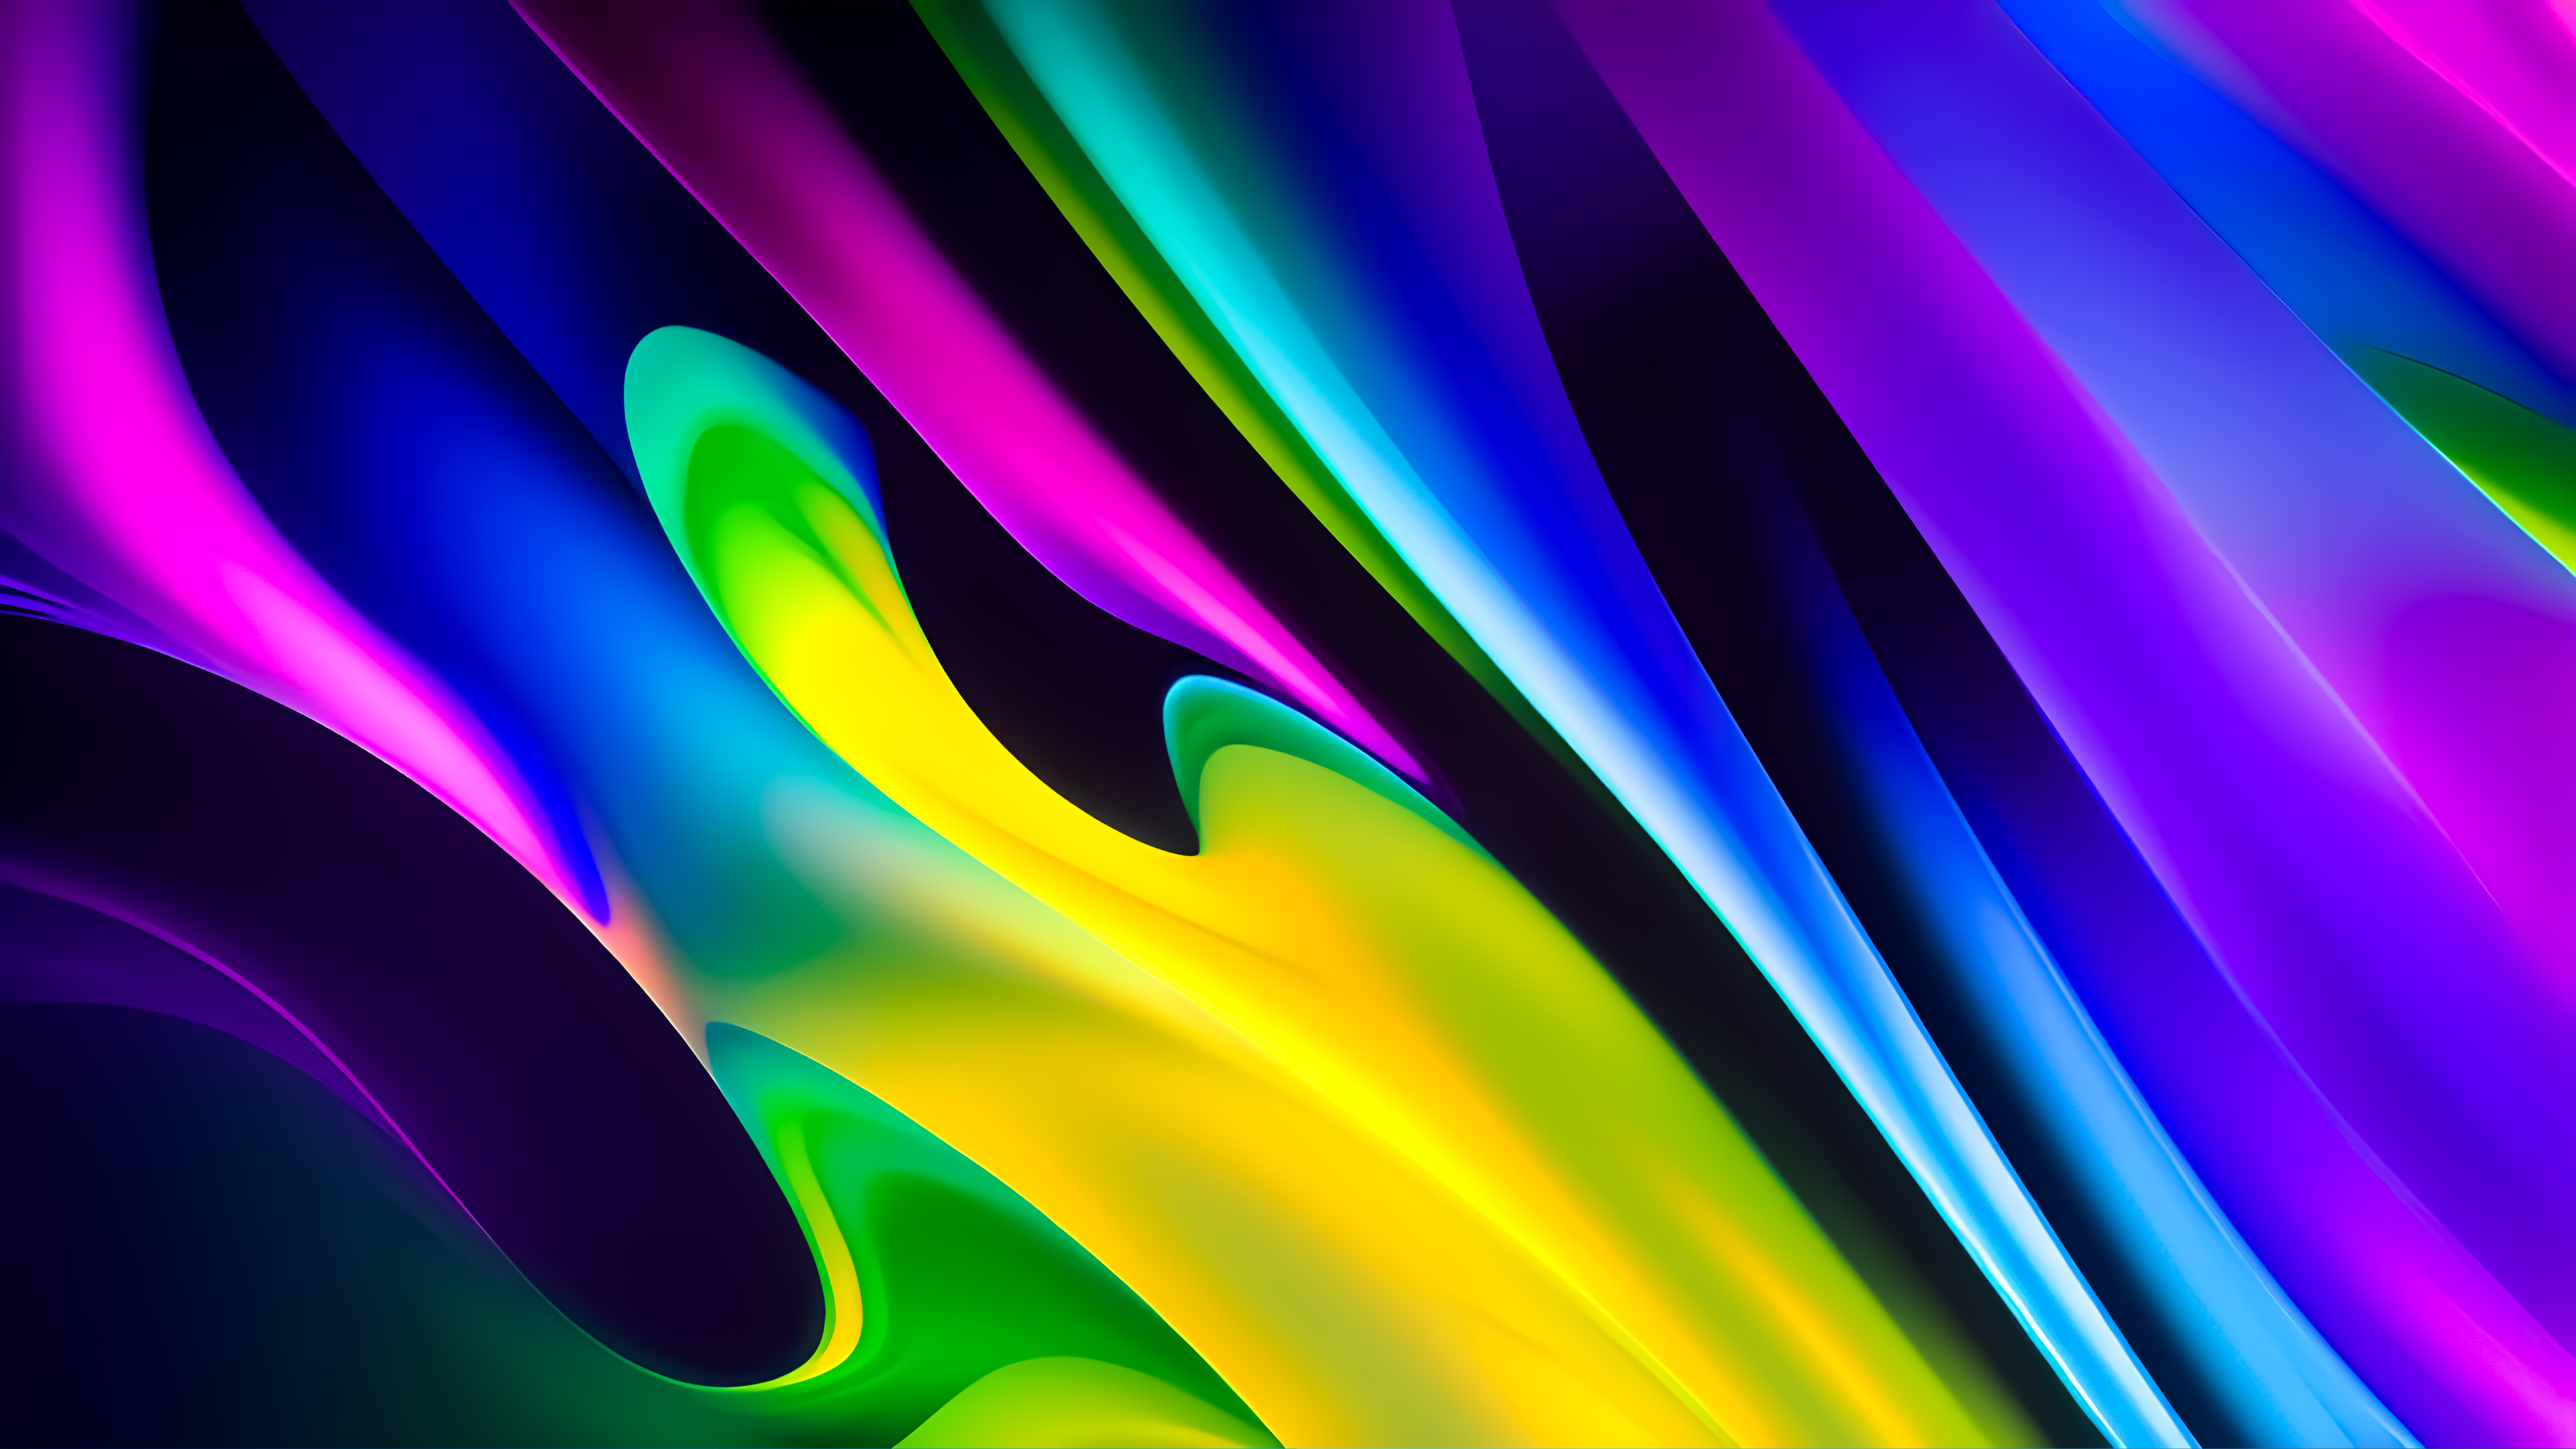 General 3840x2160 digital art colorful abstract minimalism simple background